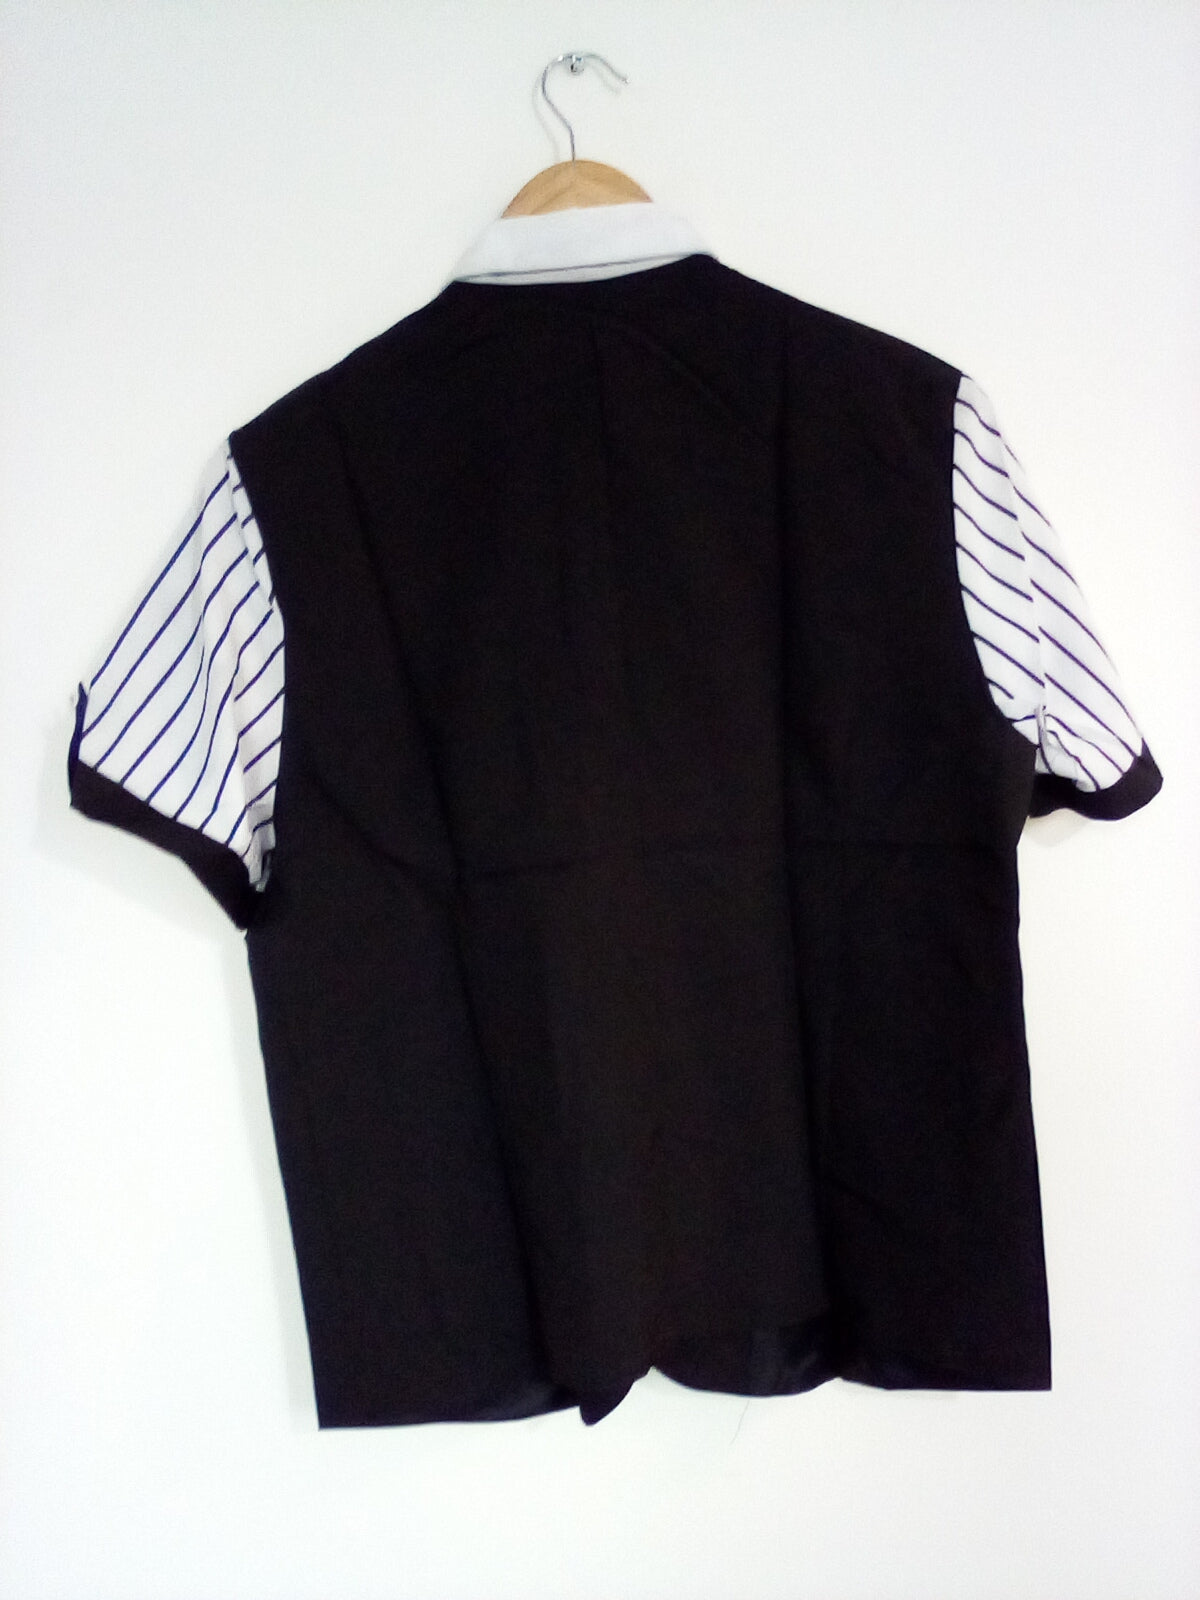 WHITE STRIPED BLOUSE WITH BLACK VEST